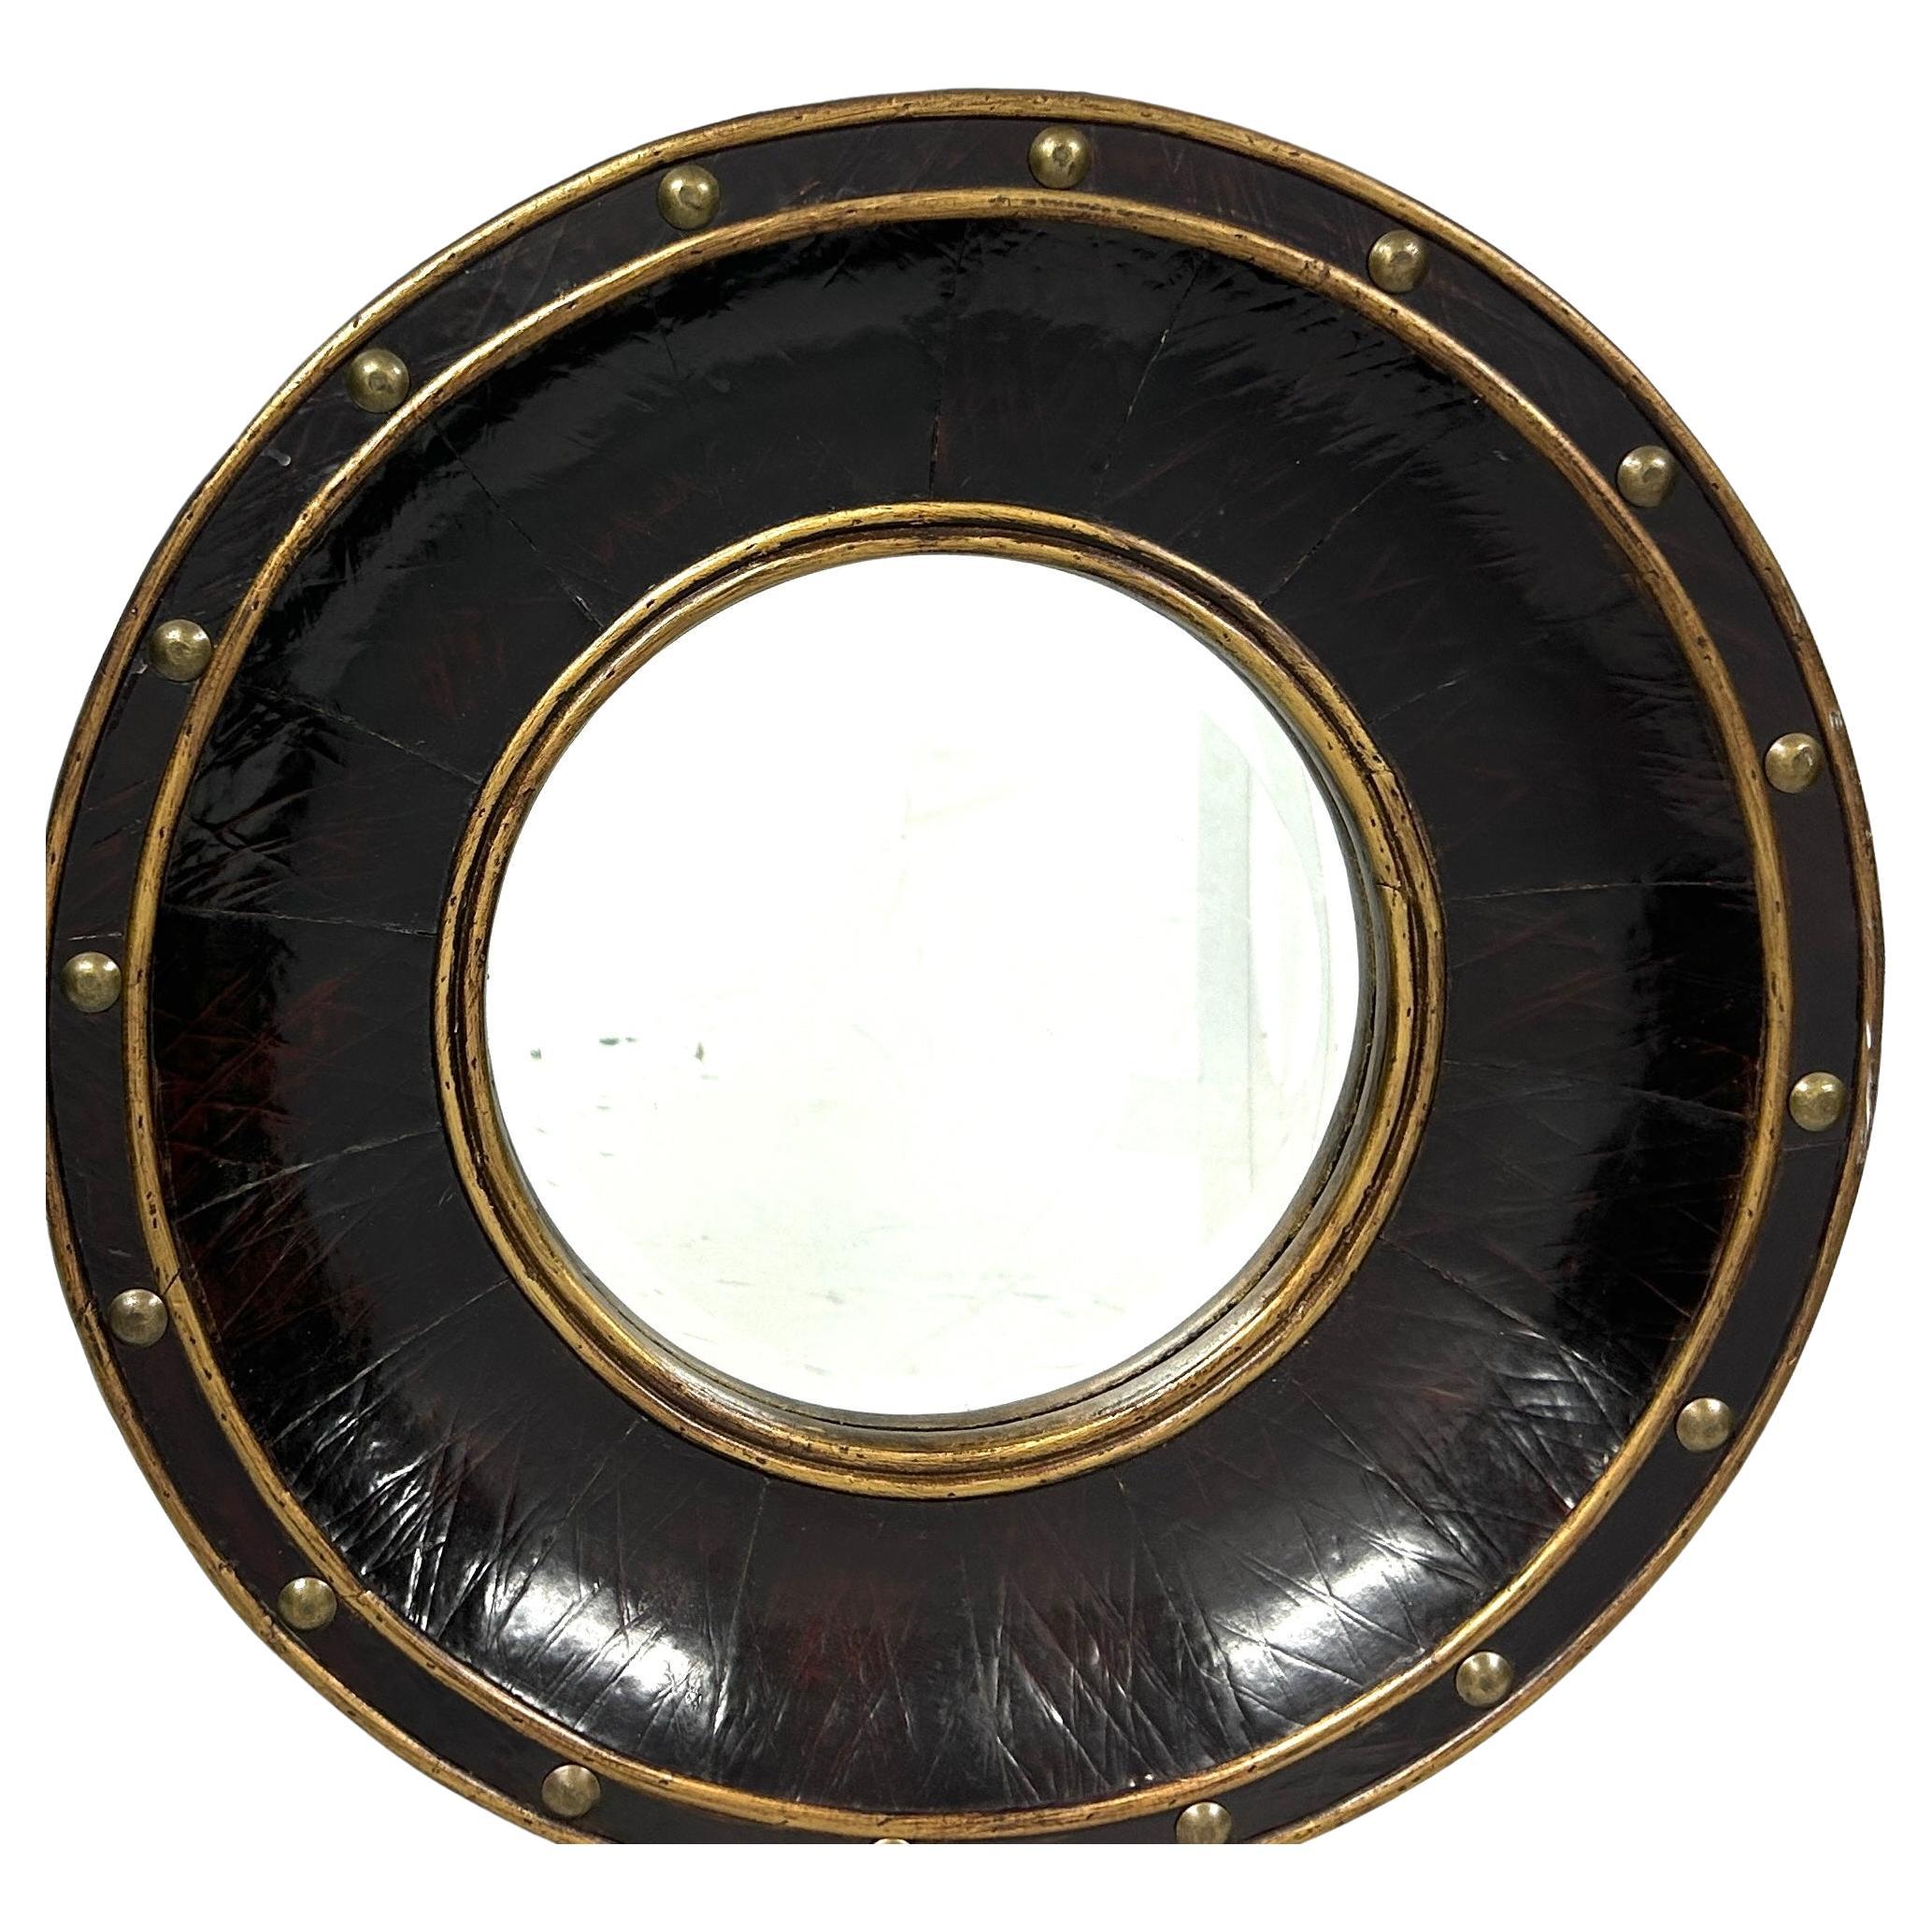 20th Century vintage faux leather round bullseye mirror with brass studs and trim. Mirror has a brown 2.5 inch frame and is in good shape without tarnish or de-silvering.